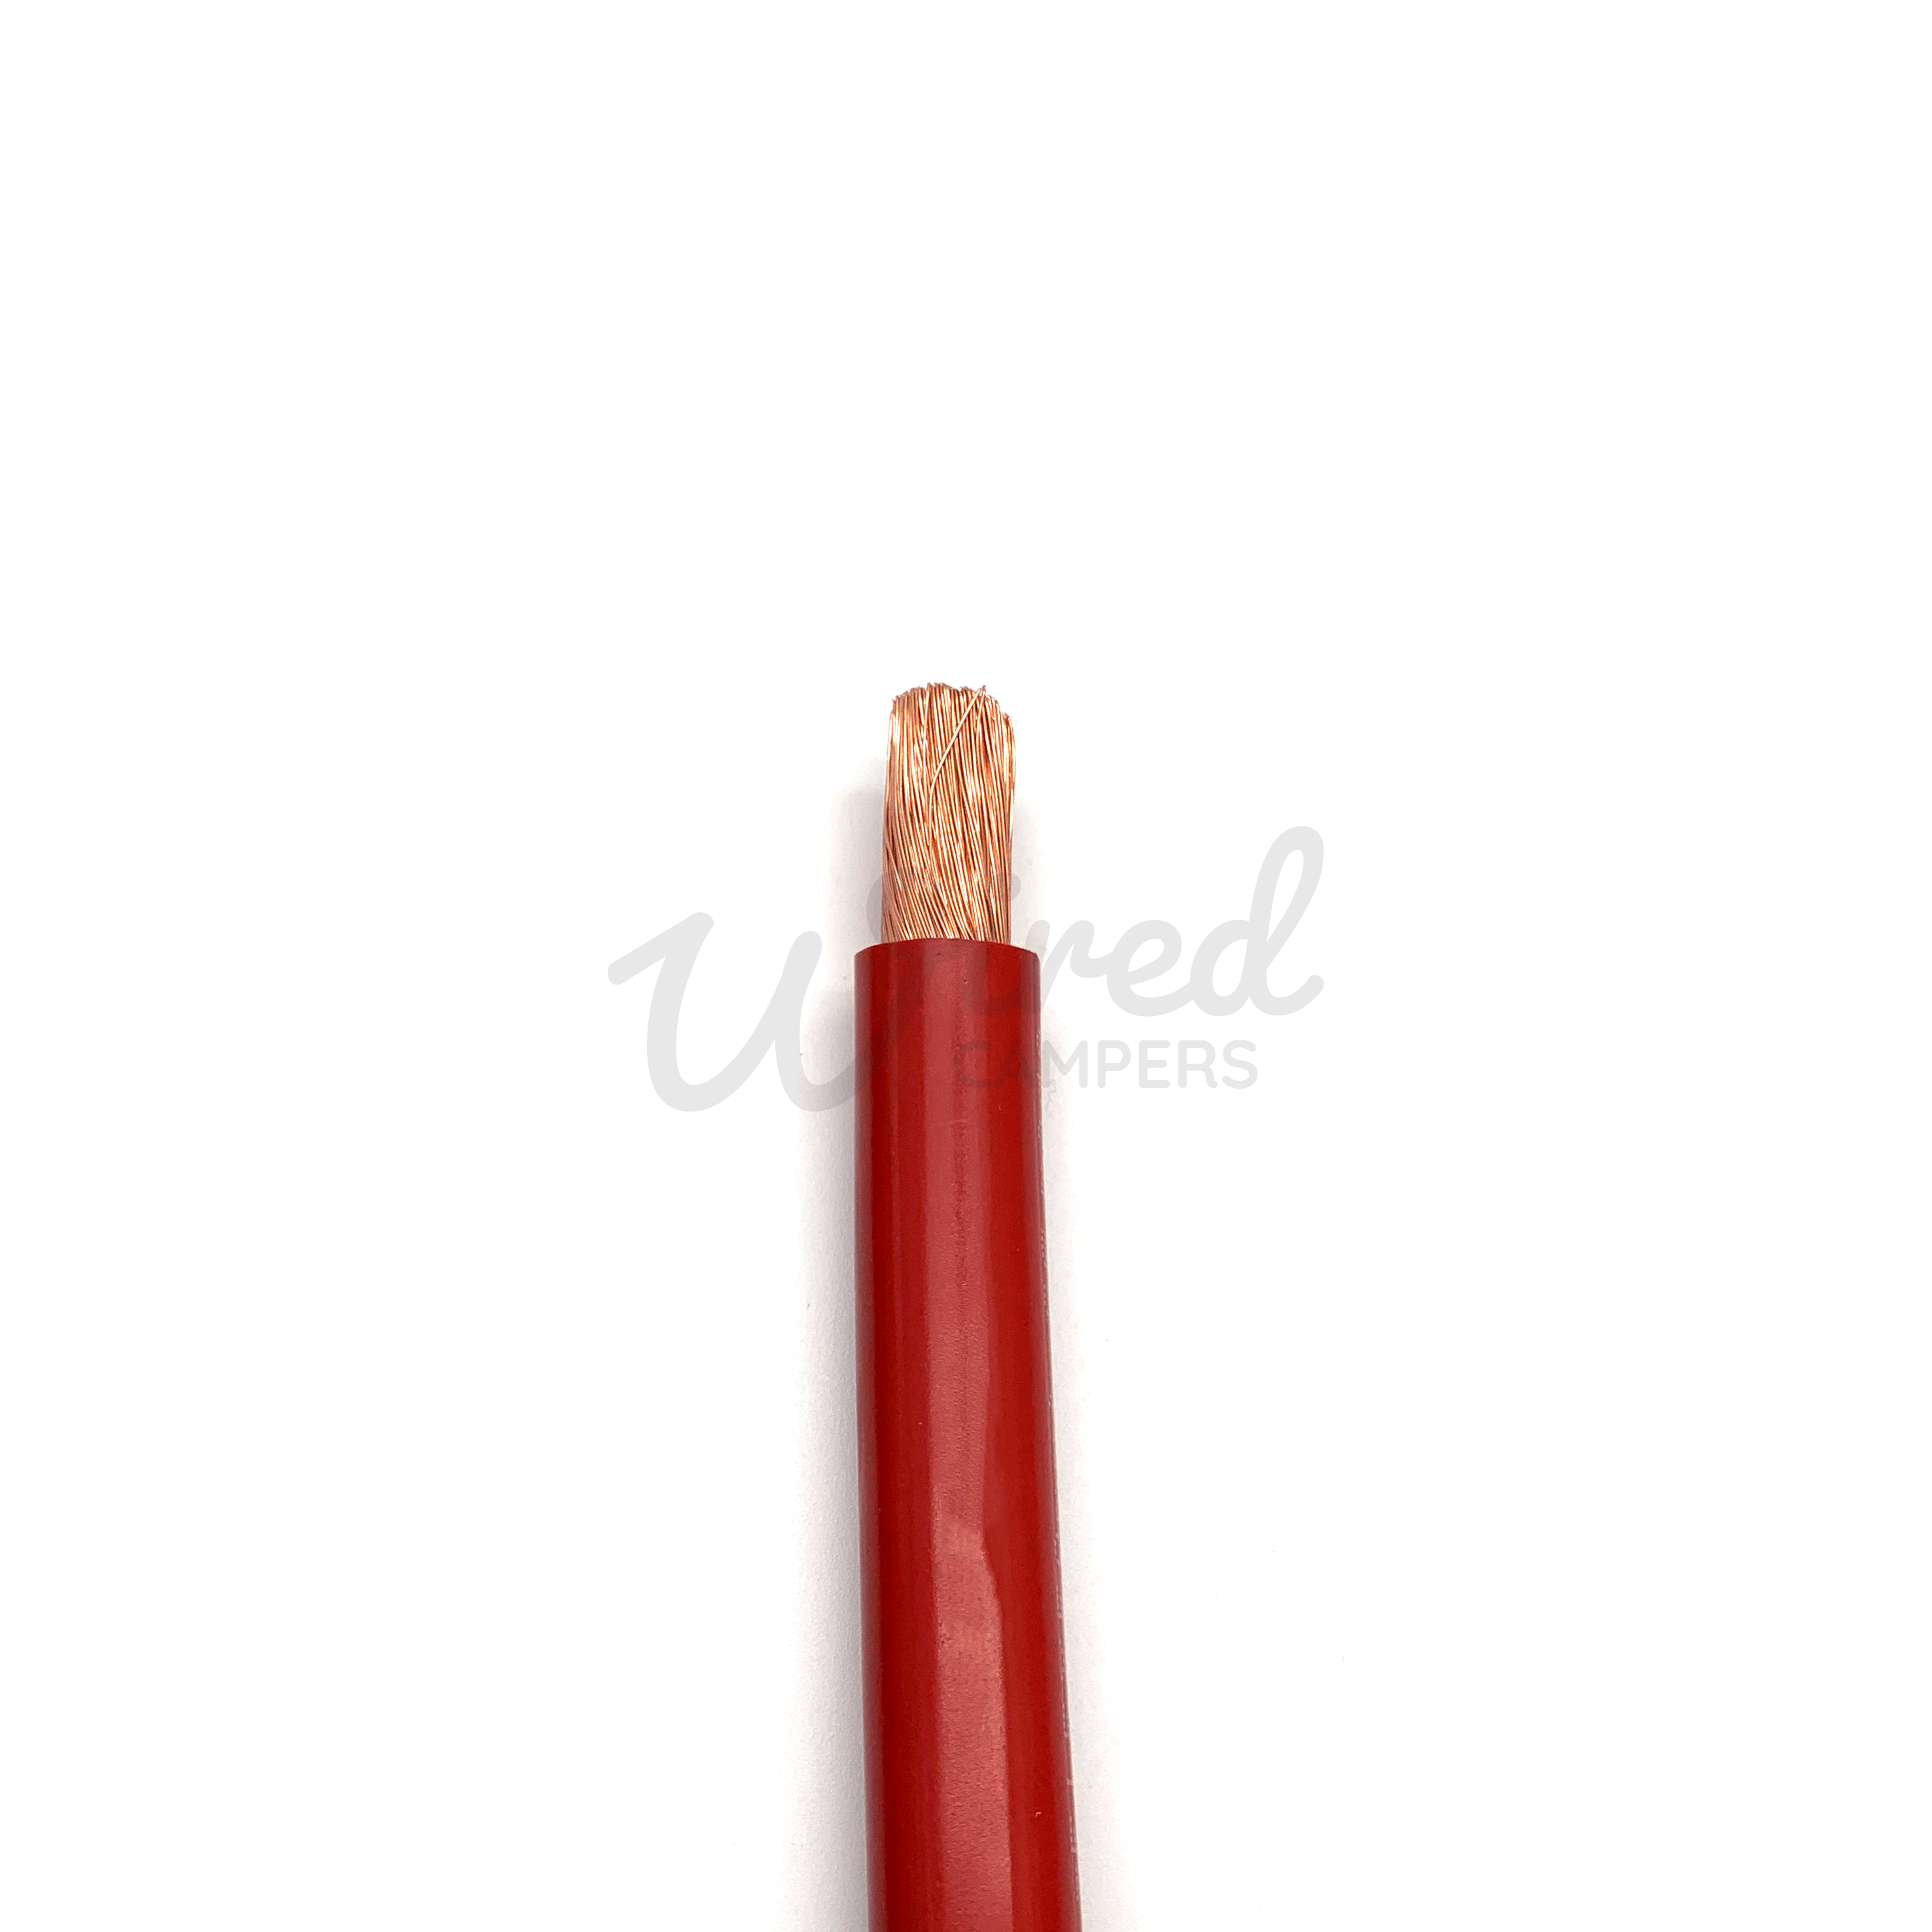 Wired Campers Limited 25mm2 170A Hi-Flex Battery/Welding/Inverter Flexible Cable - Red Positive